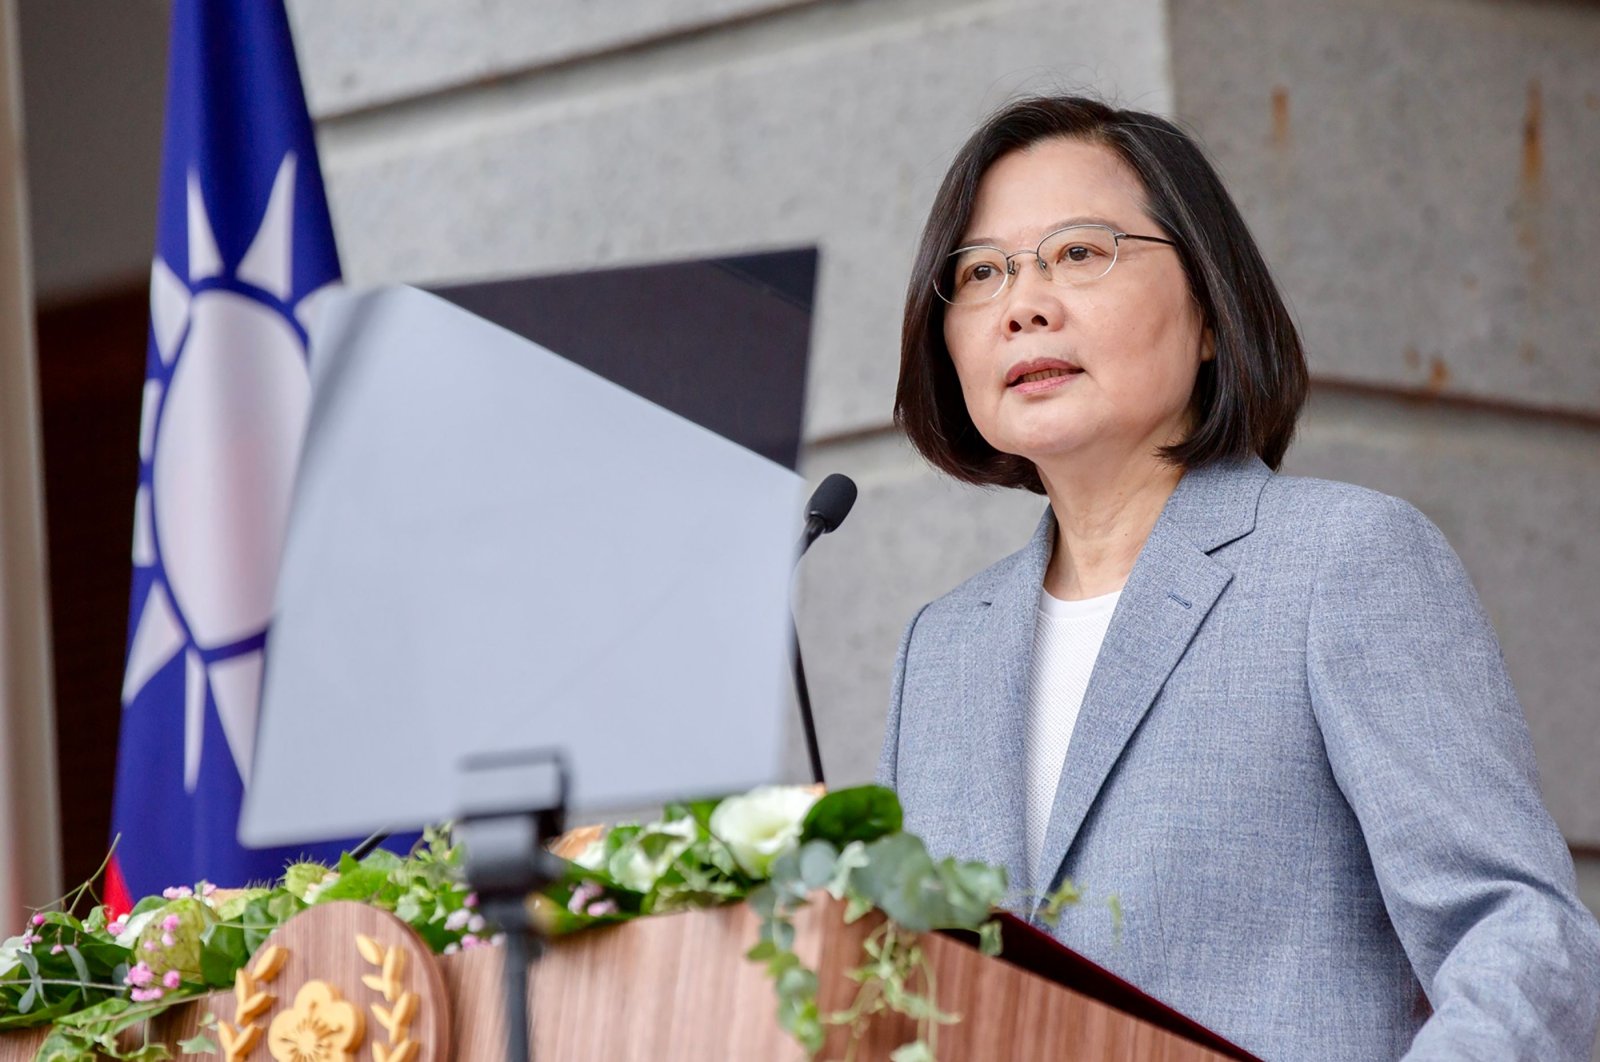 Taiwan's President Tsai Ing-wen speaking at the Taipei Guest House as part of her inauguration for her second term in office, Taipei, Taiwan, May 20, 2020. (AFP Photo)